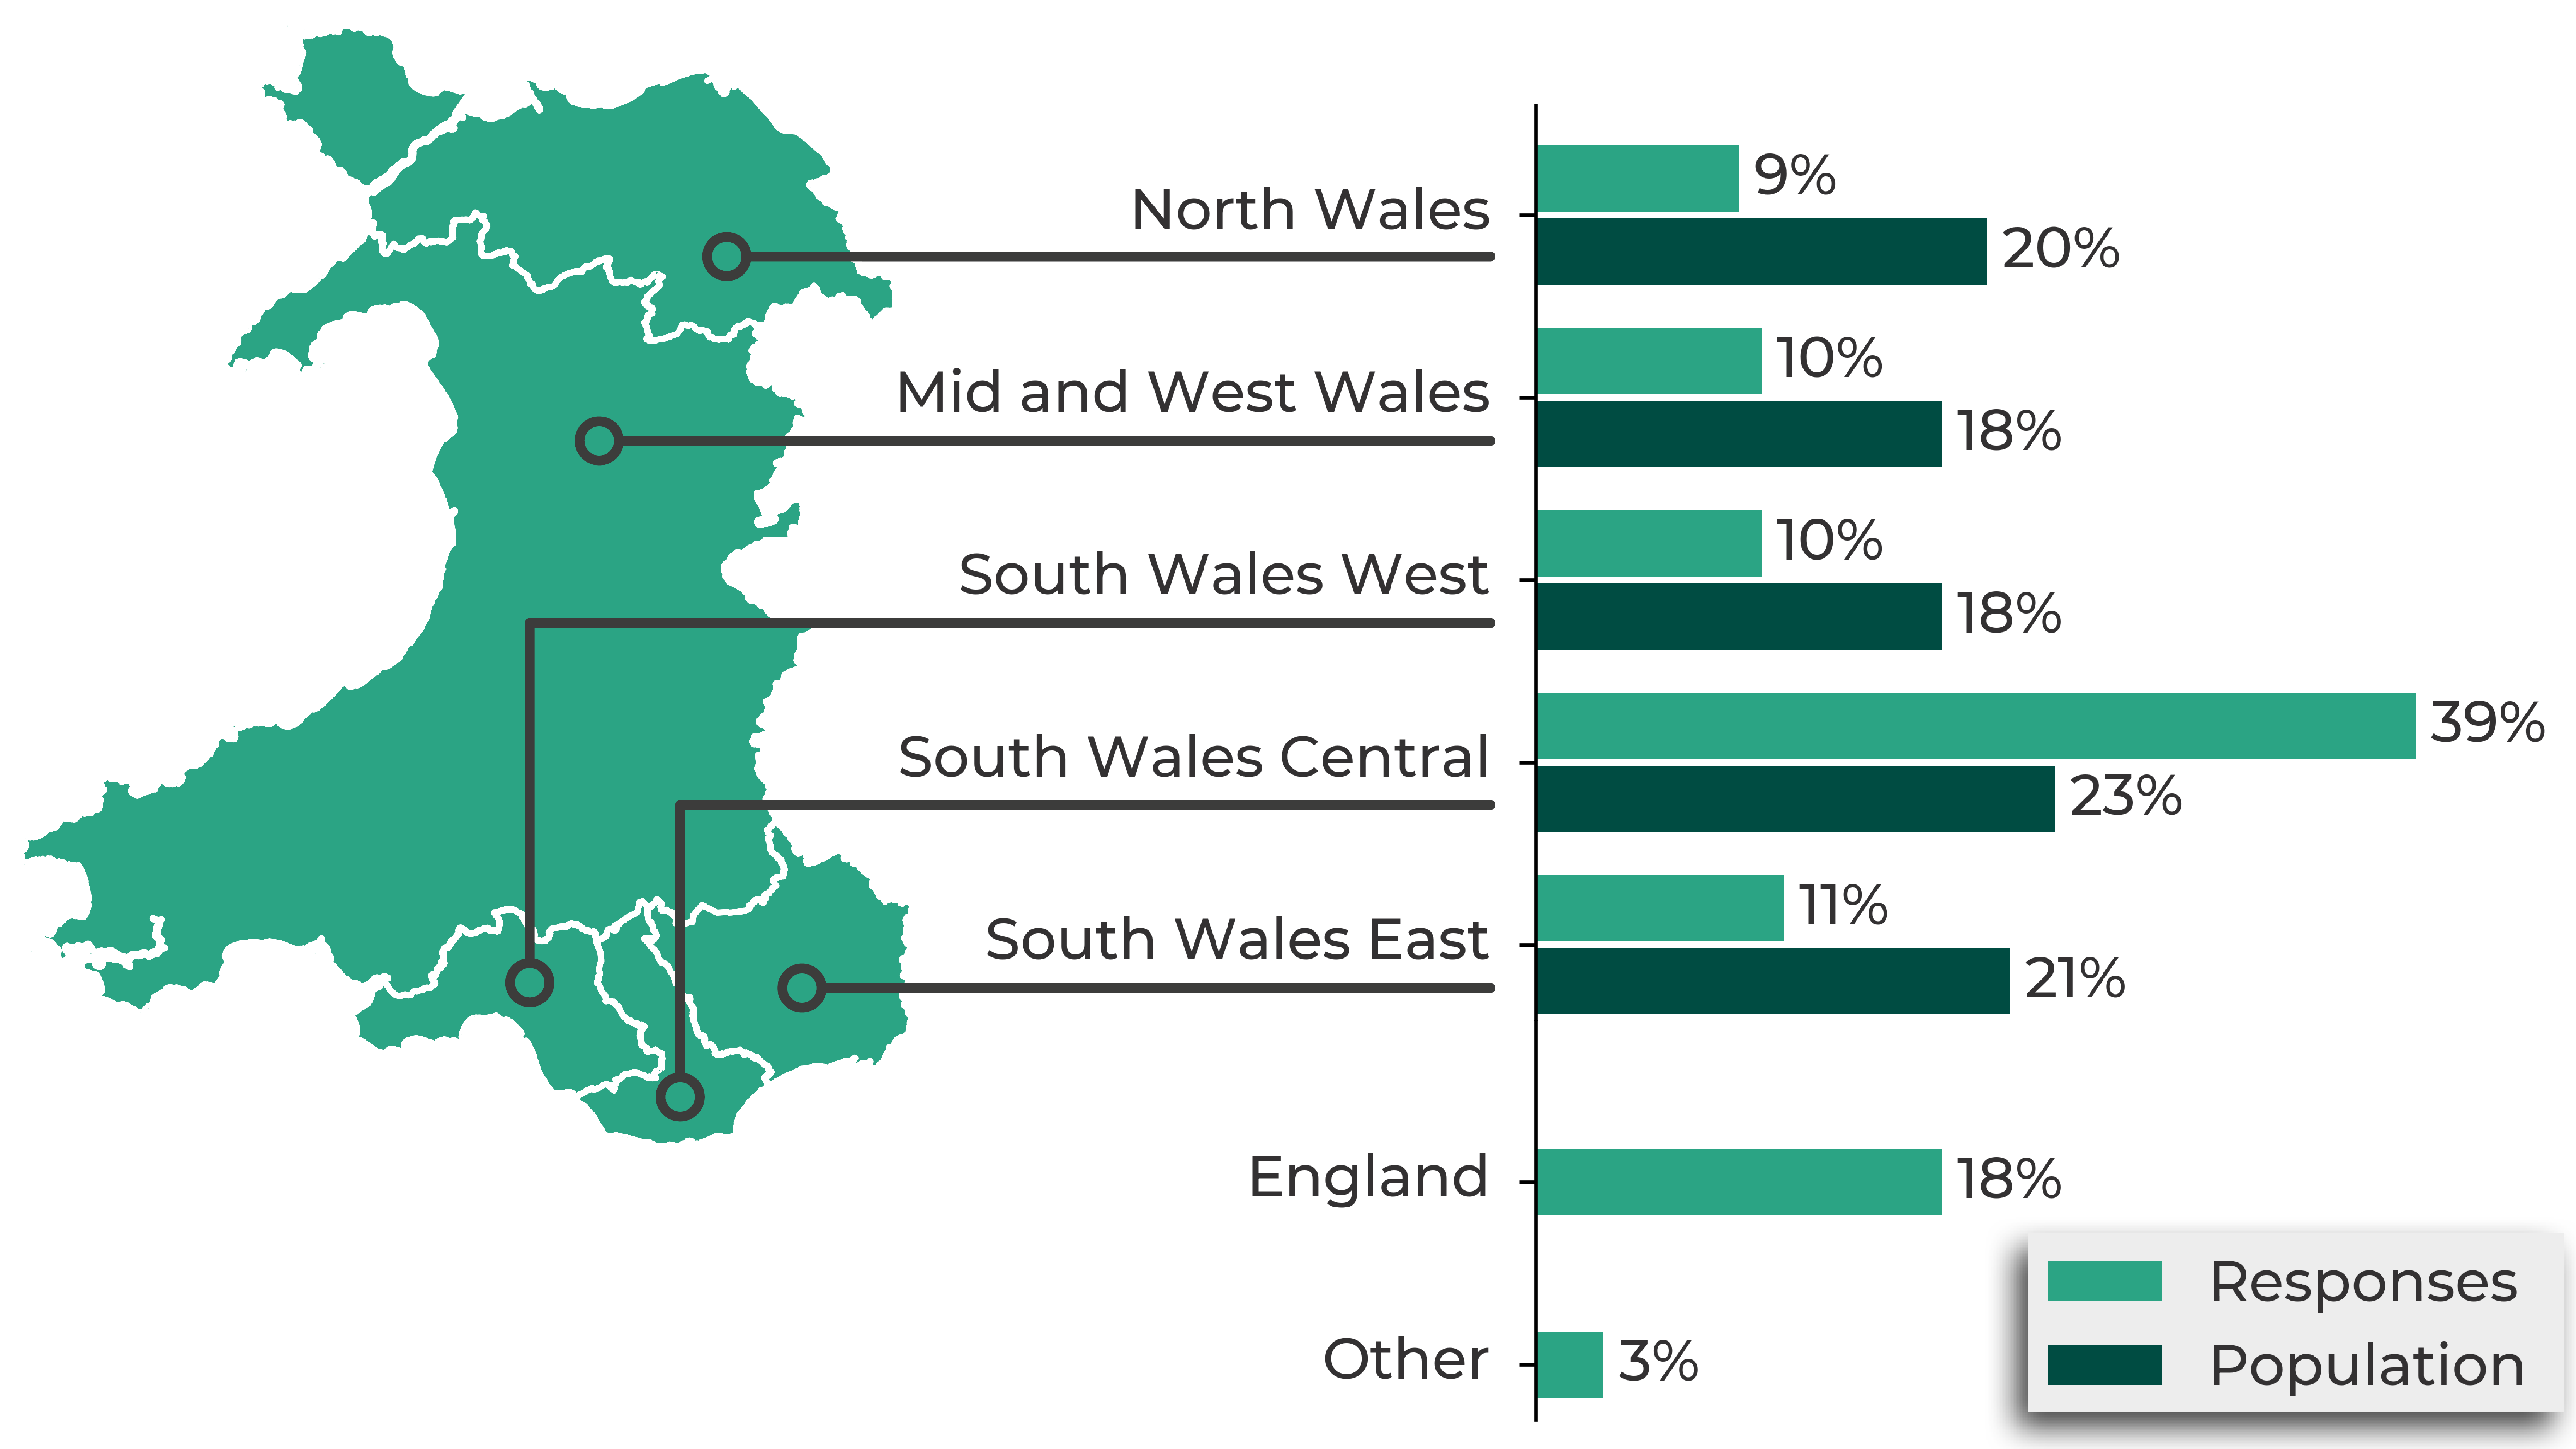 A map and graph showing the distribution of survey respondents compared to the population, by Welsh region. North Wales: 9% of responses, 20% of population. Mid and West Wales: 10% of responses, 18% of population. South Wales West: 10% of responses, 18% of population. South Wales Central: 39% of responses, 23% of population. South Wales East: 11% of responses, 21% of population. England: 18% of responses. Other: 3% of responses.